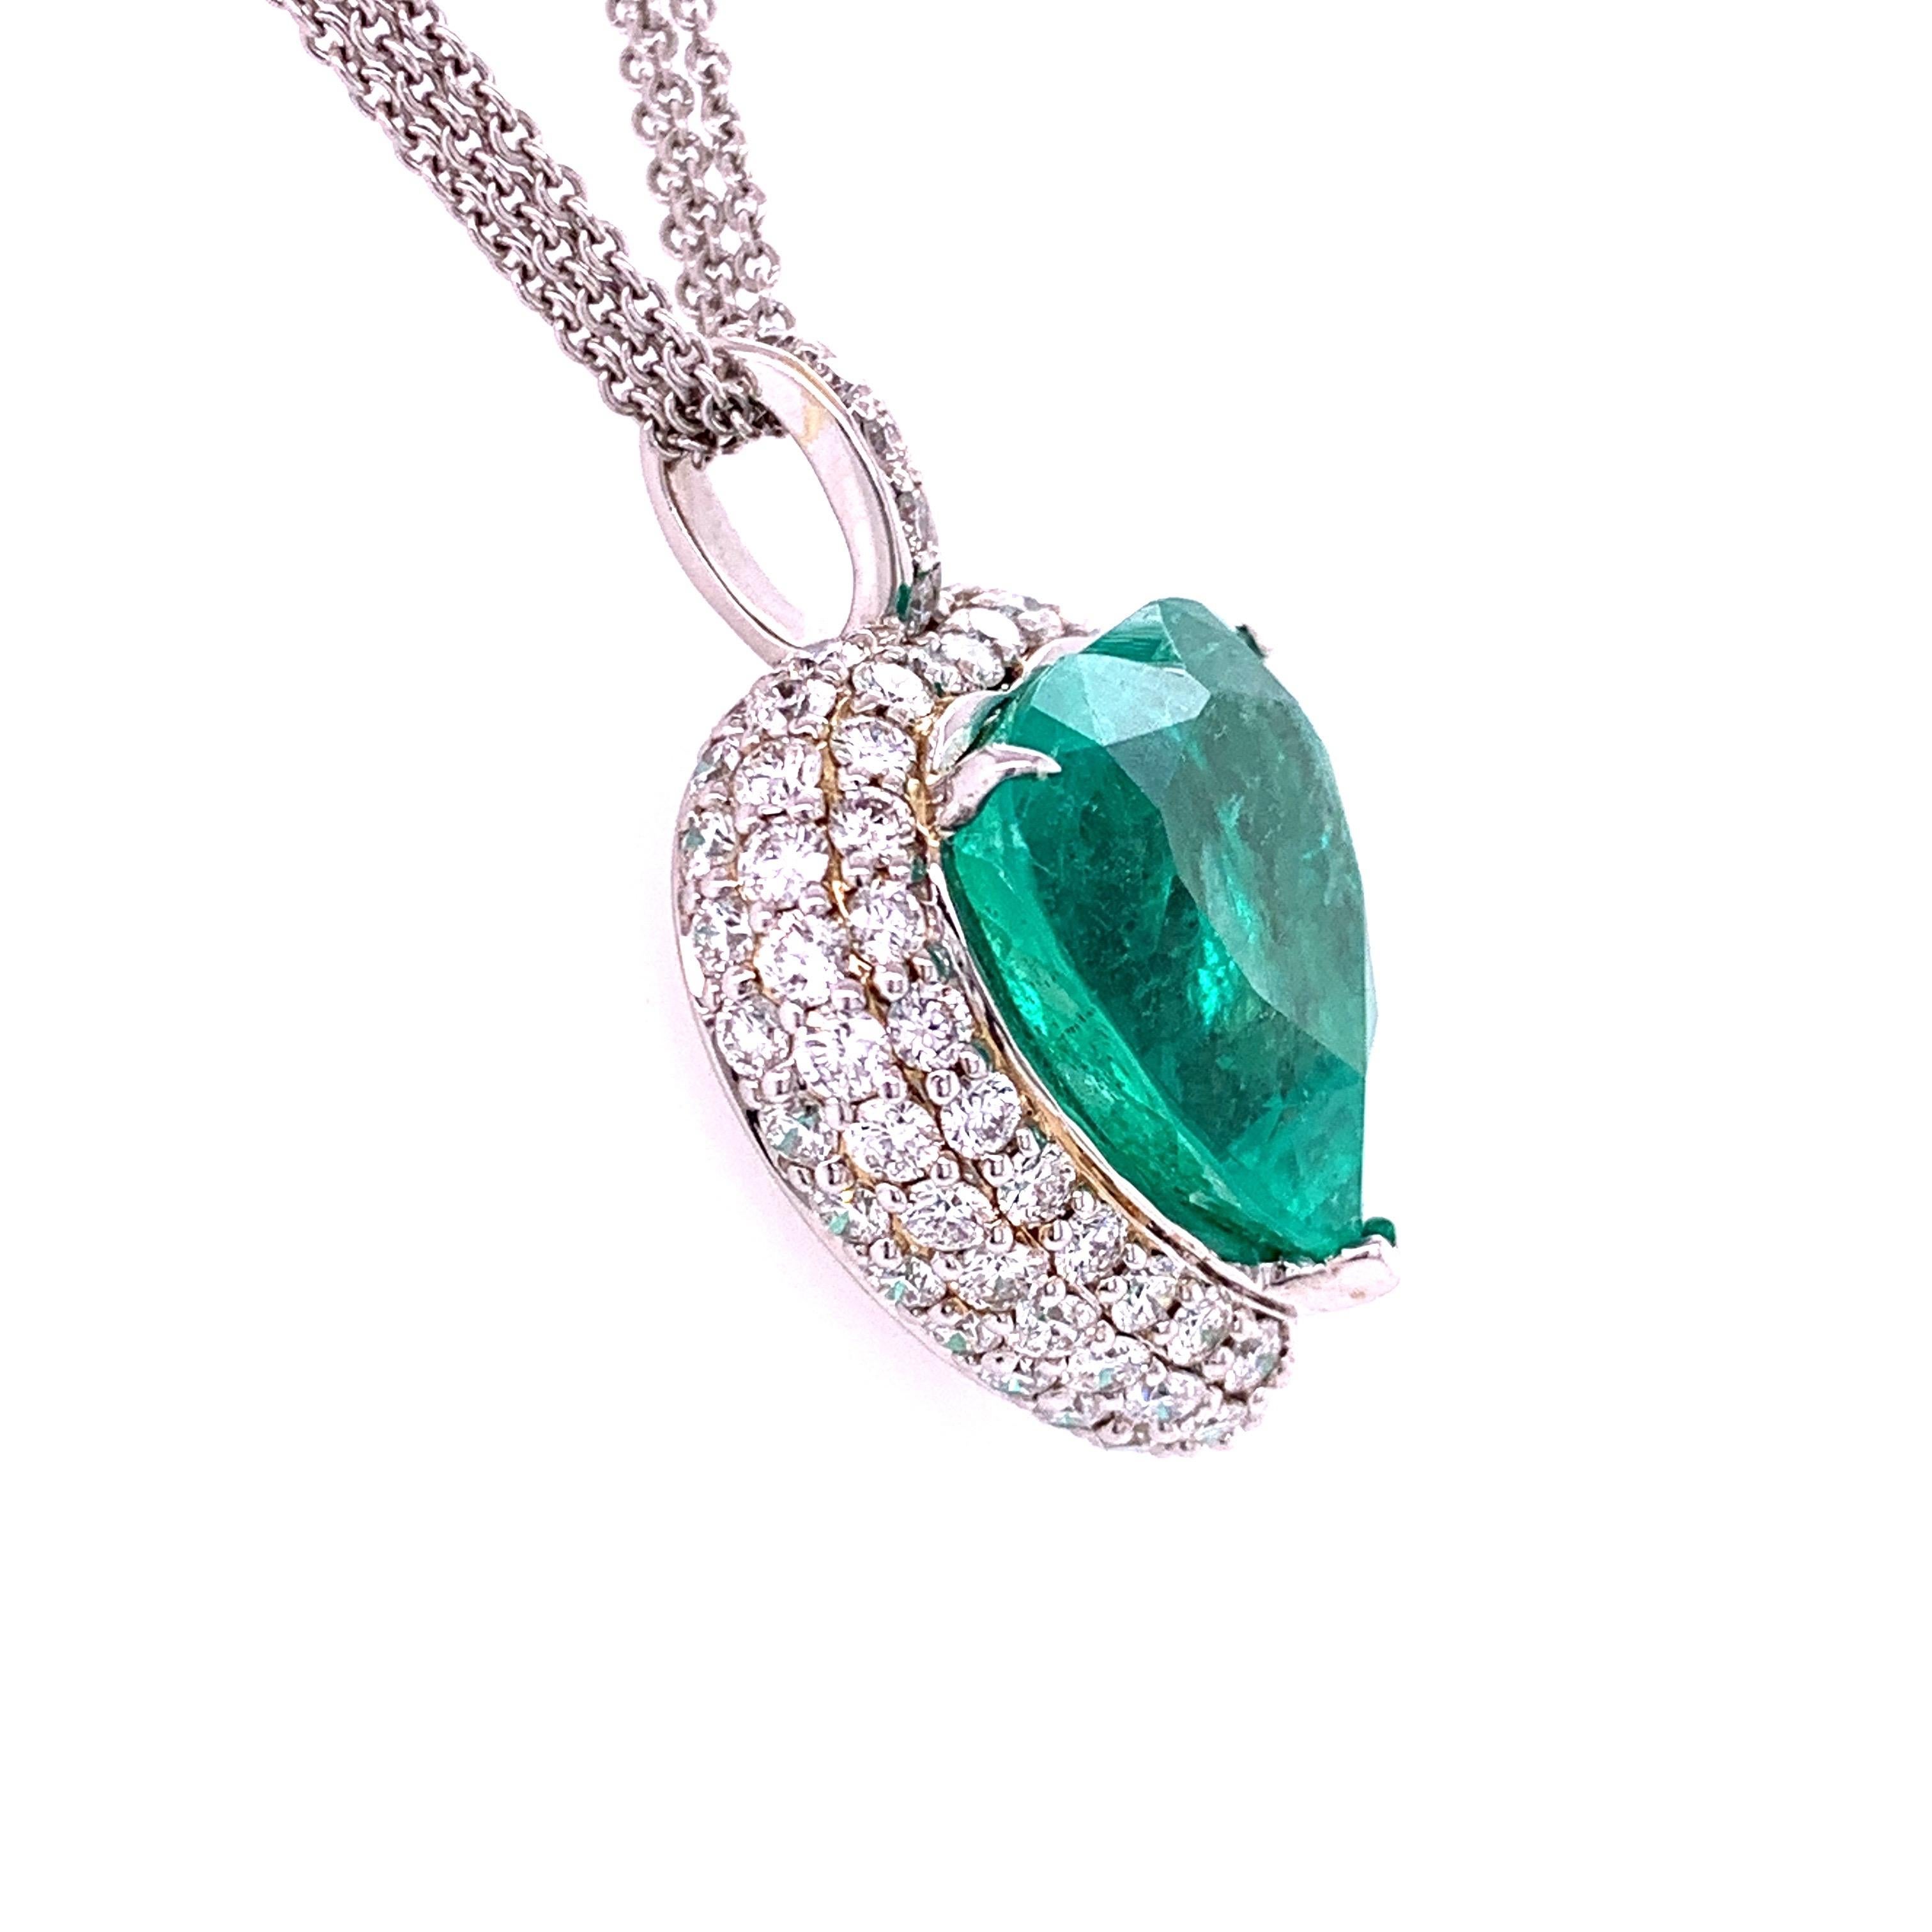 Rare emerald diamond pendant. High brilliance, heart shape, lively bluish-green tone, Colombian natural emerald mounted with one split prong, two knife prongs, accented with two of of round brilliant cut diamond. Handcrafted classic design set in 18